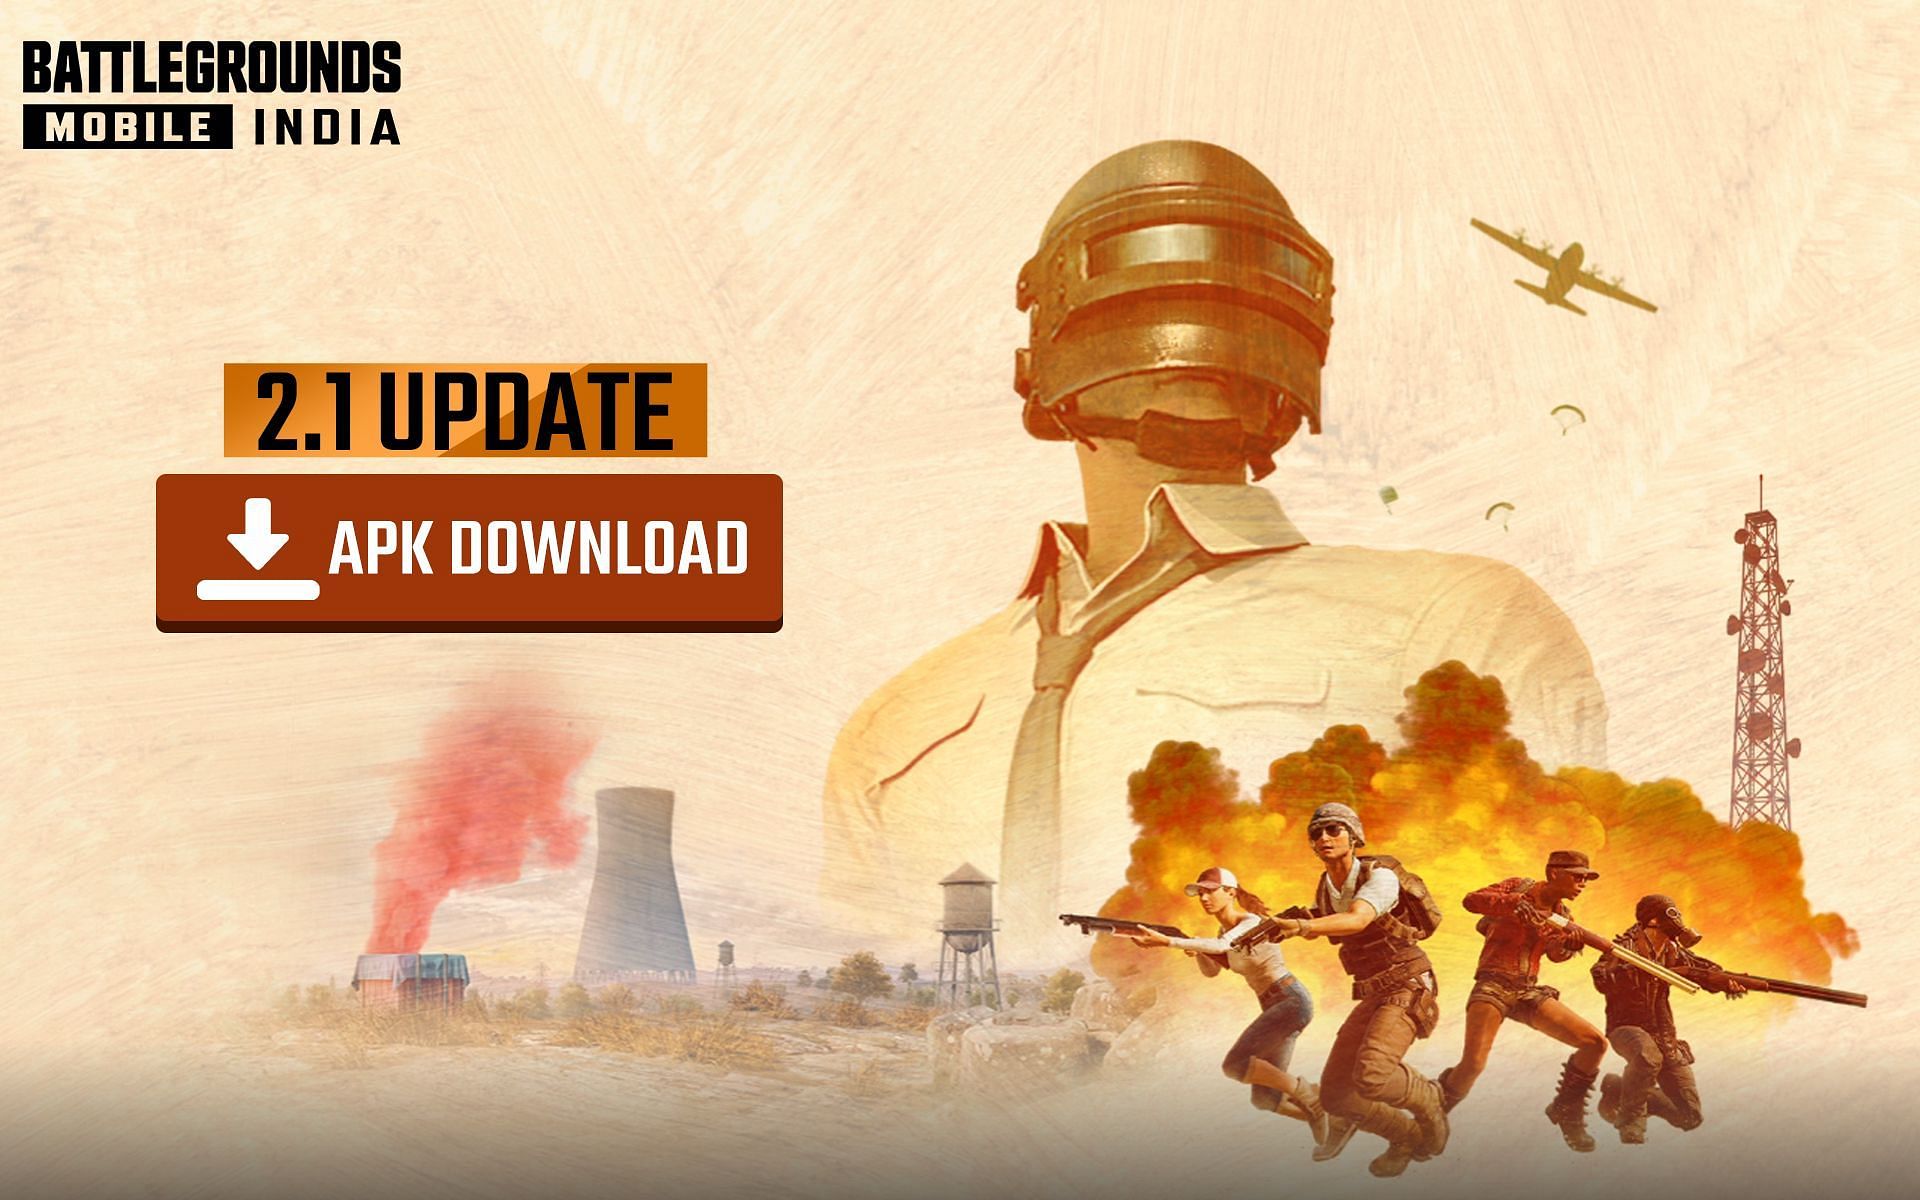 Gamers can now download BGMI 2.1 APK from the official website (Image via Sportskeeda)